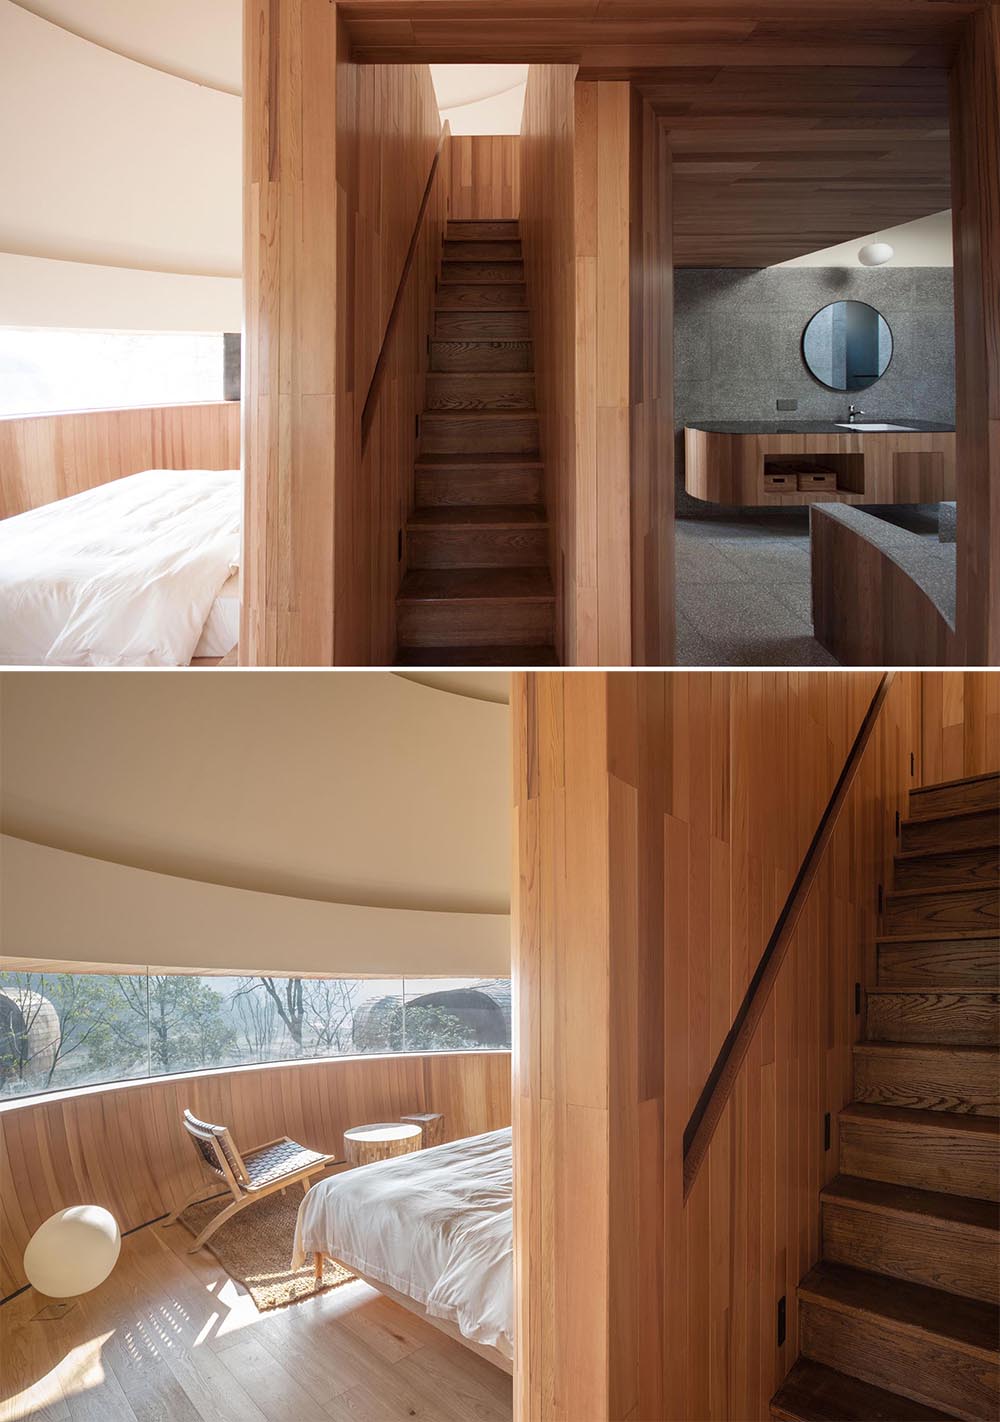 A modern cabin with a narrow staircase and built-in handrail.